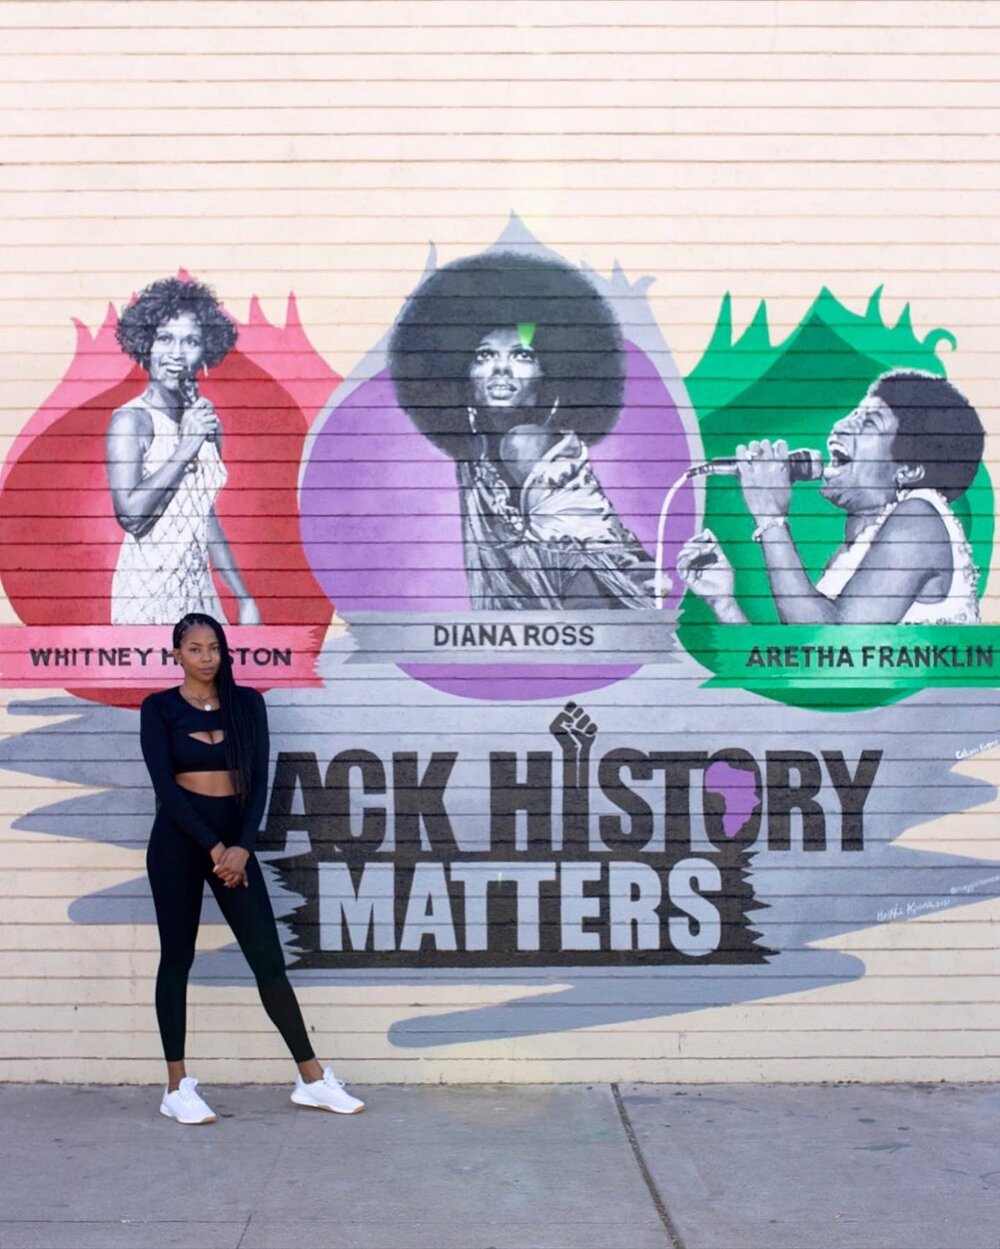 Black History Matters: Every Single Day ✊🏾

My trip to Arizona was amazing and I am so grateful to have been able to explore so much in just one week. The art, history, food, and warmth were just what I needed to end a freezing cold month. 

My goal was to make all the information I researched and found way more accessible so I&rsquo;ve posted (3) new blog posts listed below for you all. 

🤎Phoenix Guide: Black History, Art &amp; Black Owned Businesses 

🤎Murals in PHX: Black History Focus 

🤎Tempe: Wellness Weekend &amp; Date Ideas

All three posts feature Black Owned Businesses and all of the info is linked for easy access. In case you missed it here are a few places I went more than once on my trip that are way too good to miss. 

📍 Breakfast Bitch (@breakfastbitch_az)
📍 House of Tricks (@houseoftricksaz)
📍 Monroe&rsquo;s Hot Chicken (@monroeshotchicken) 

So pumped to be able to share all this with you. Huge shoutout to @united, @visitphoenix and @tempetourism for helping to